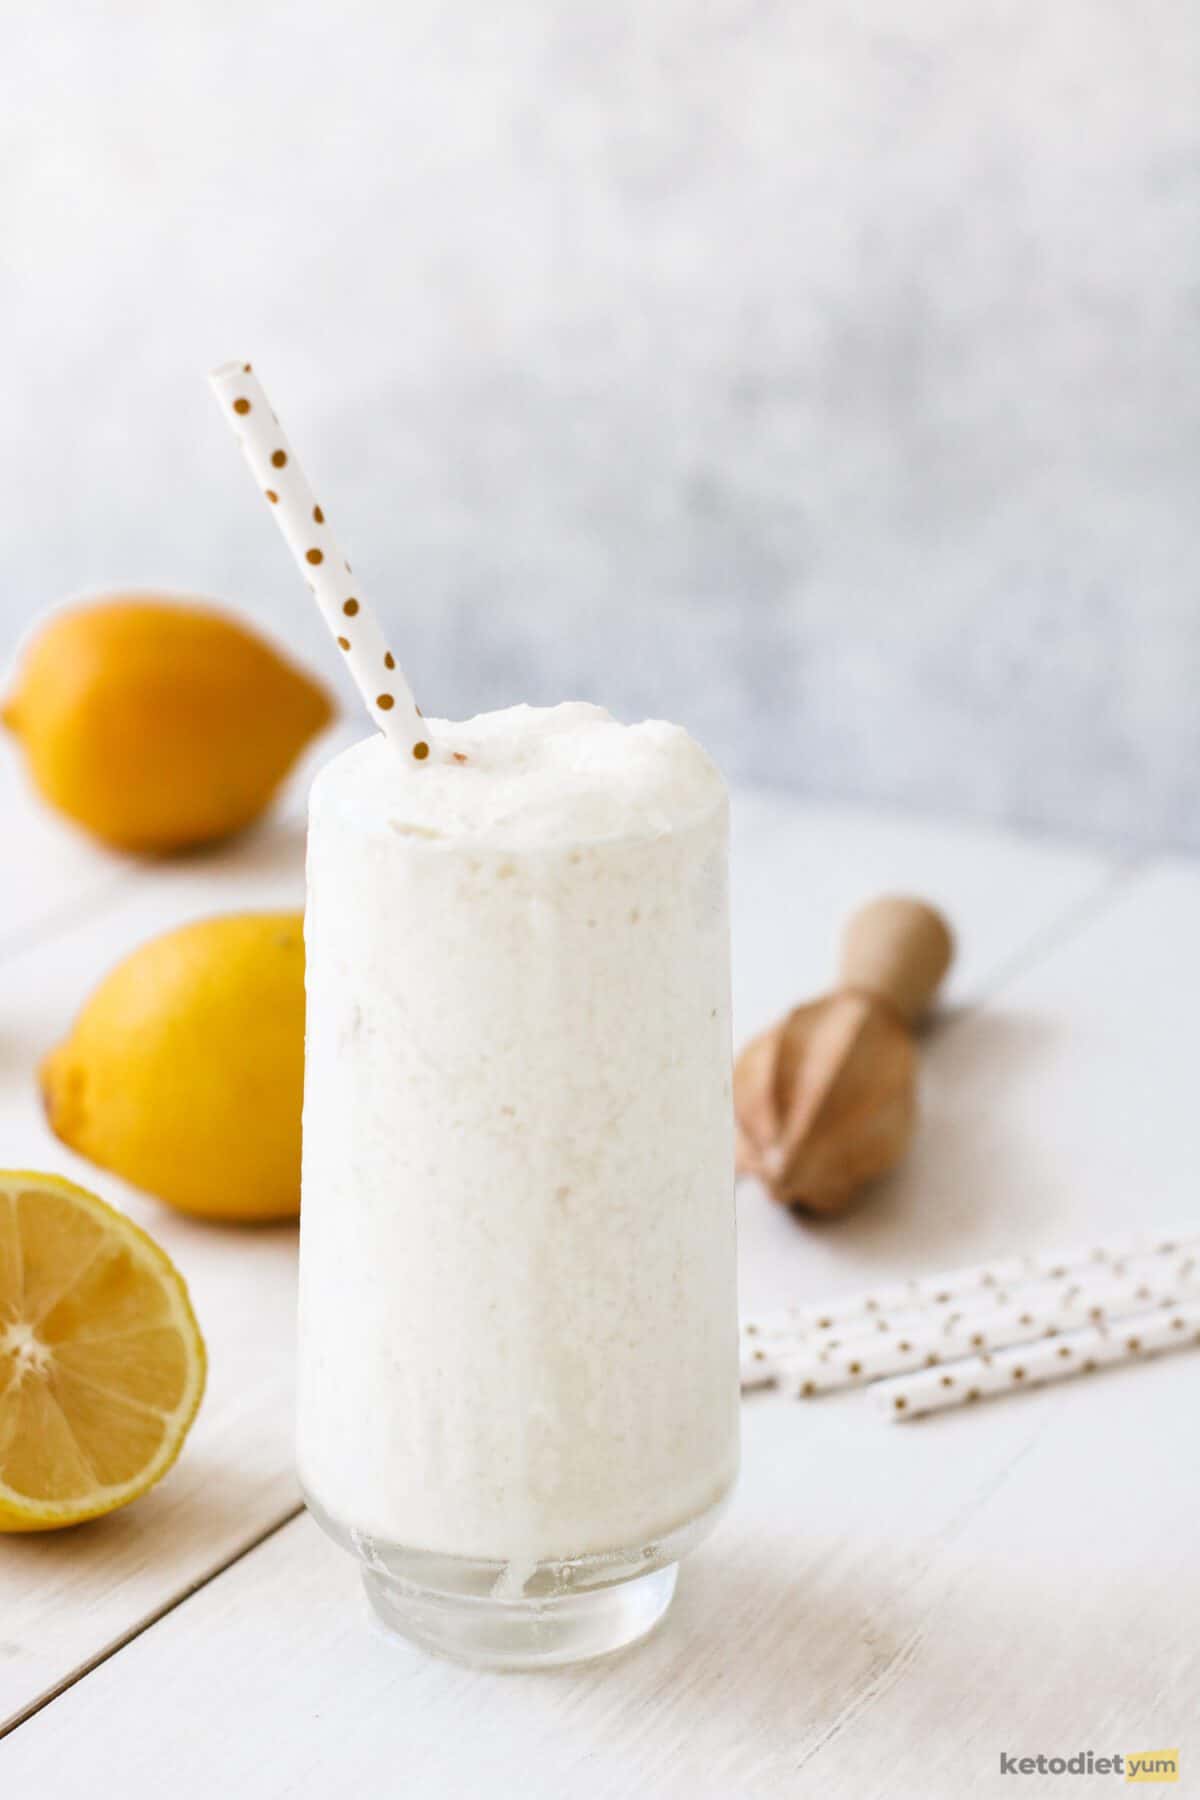 Low carb frozen lemonade that is sugar free and keto friendly